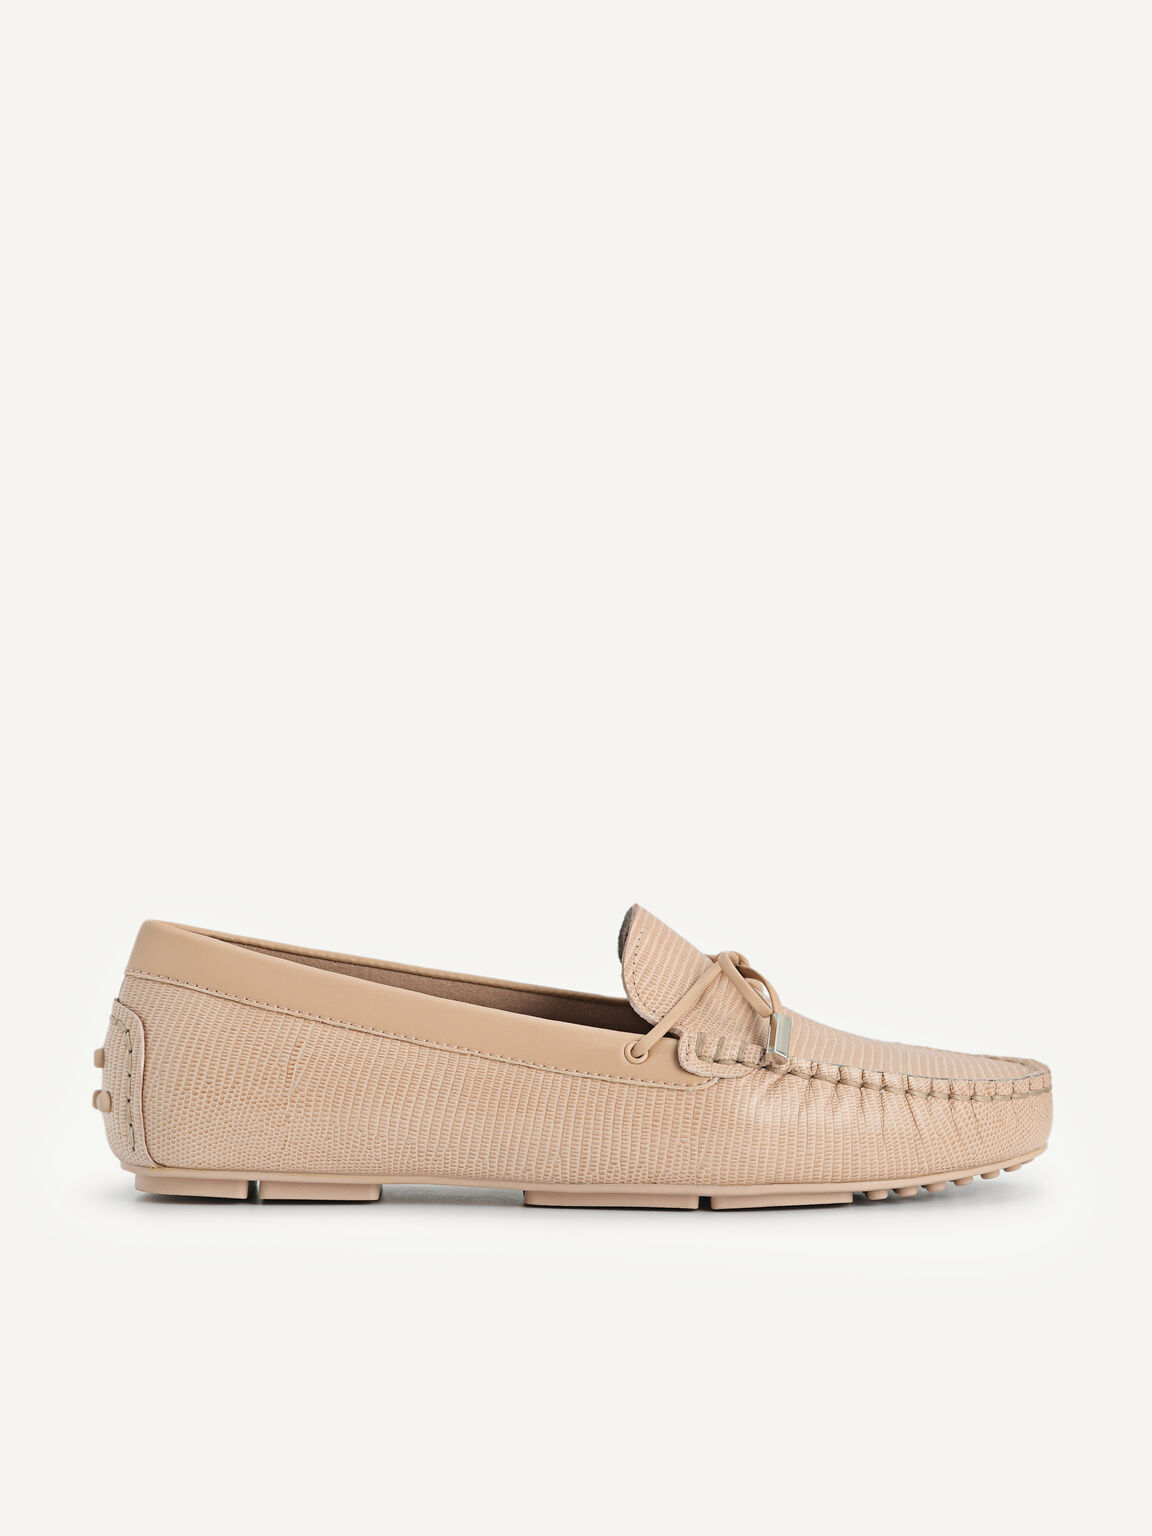 Lizard-effect Leather Bow Moccasins, Nude